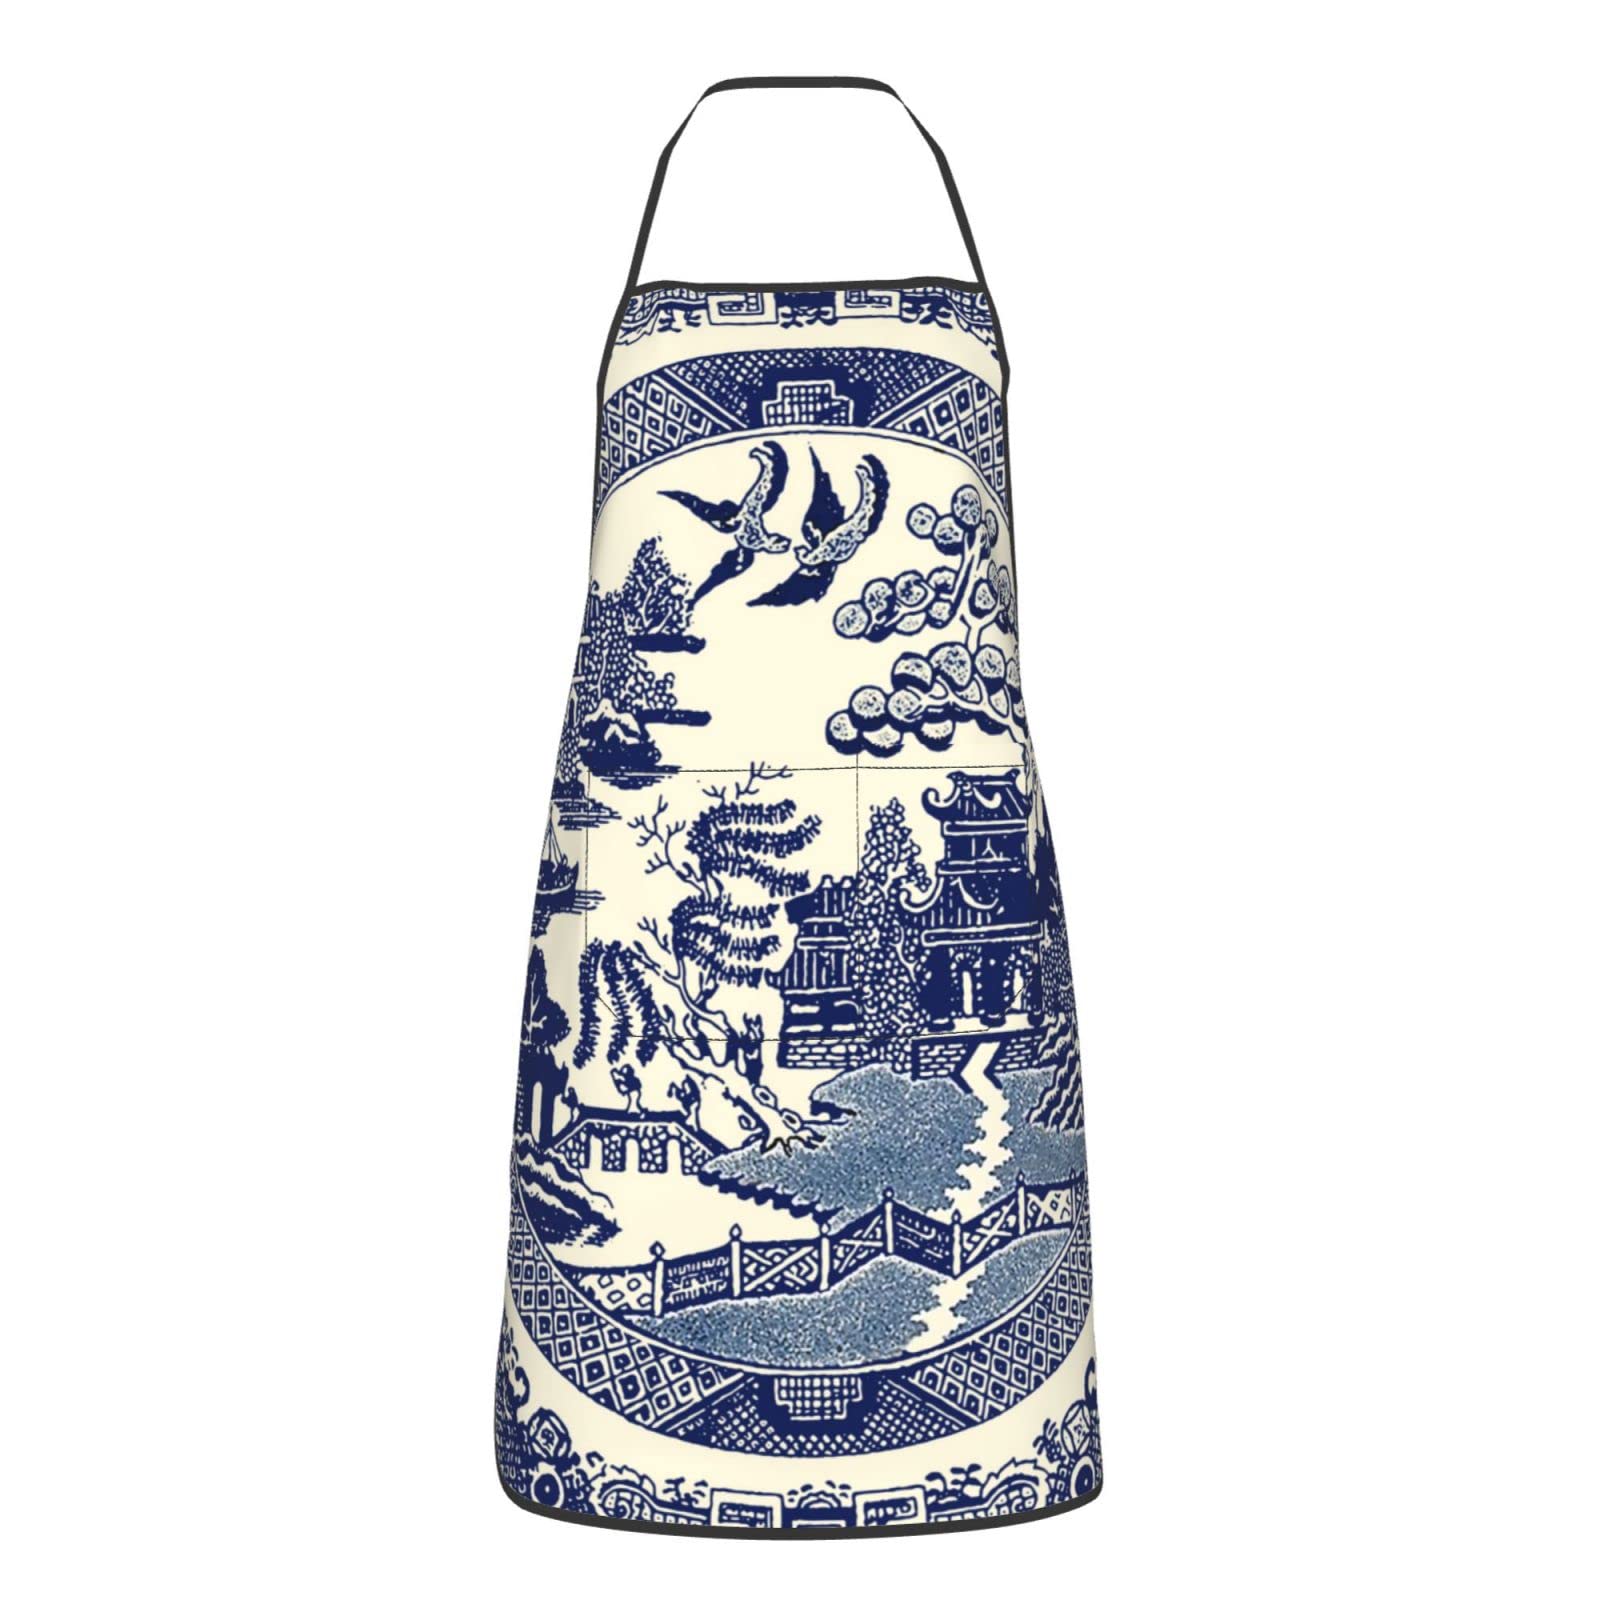 Oriental Style Chinese Blue Willow Aprons Women Men With Pocket Washable Anti-Stain Kitchen Chef Bib Apron For Cooking Garden Bbq Painting